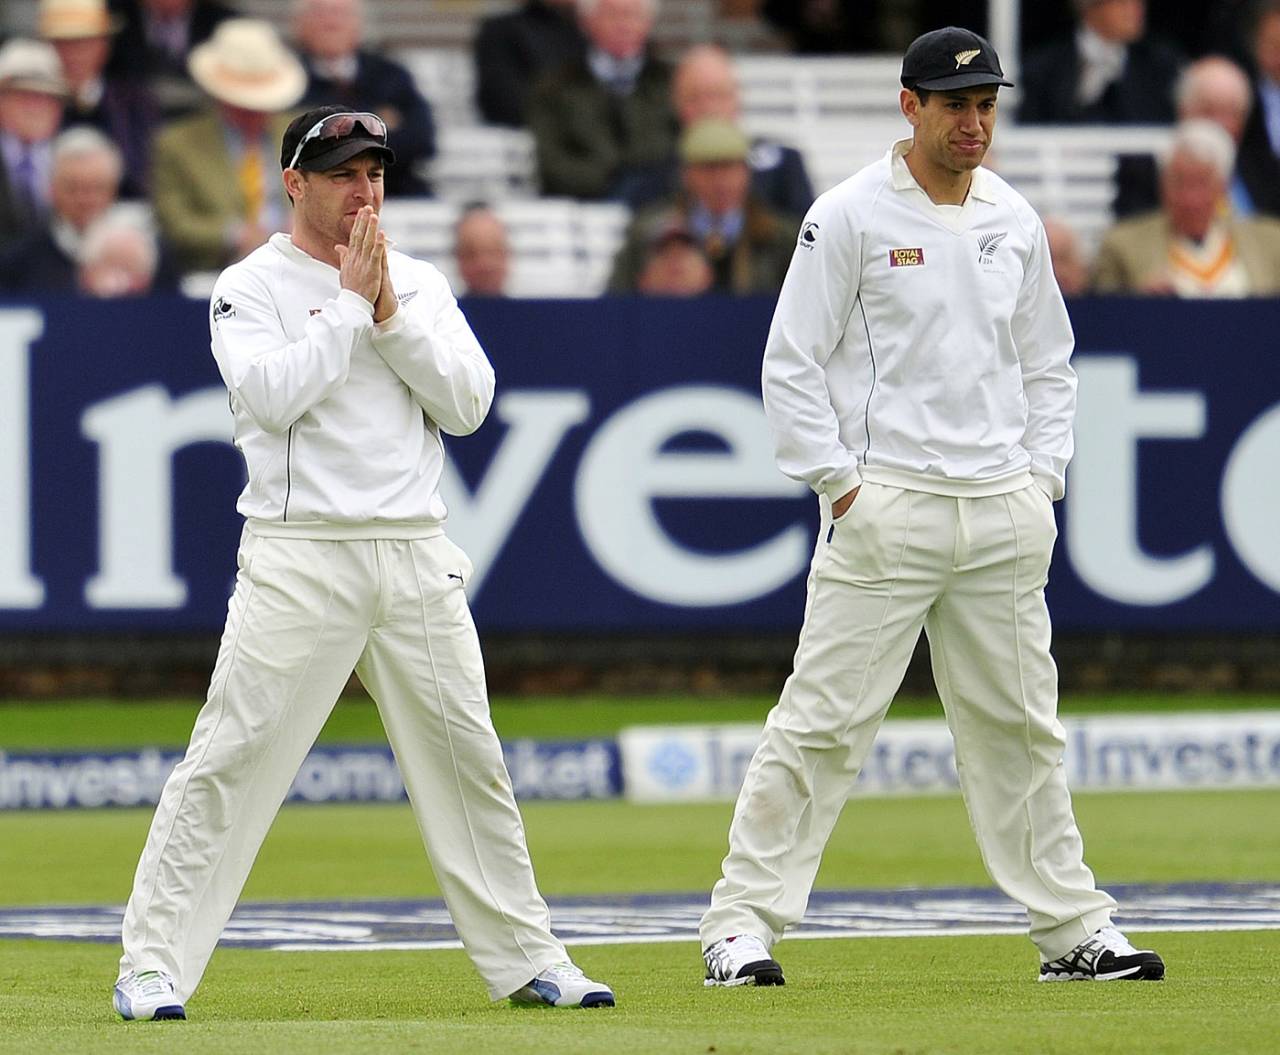 Brendon McCullum and Ross Taylor patrol the slips, England v New Zealand, 1st Test, Lord's, 2nd day, May 17, 2013